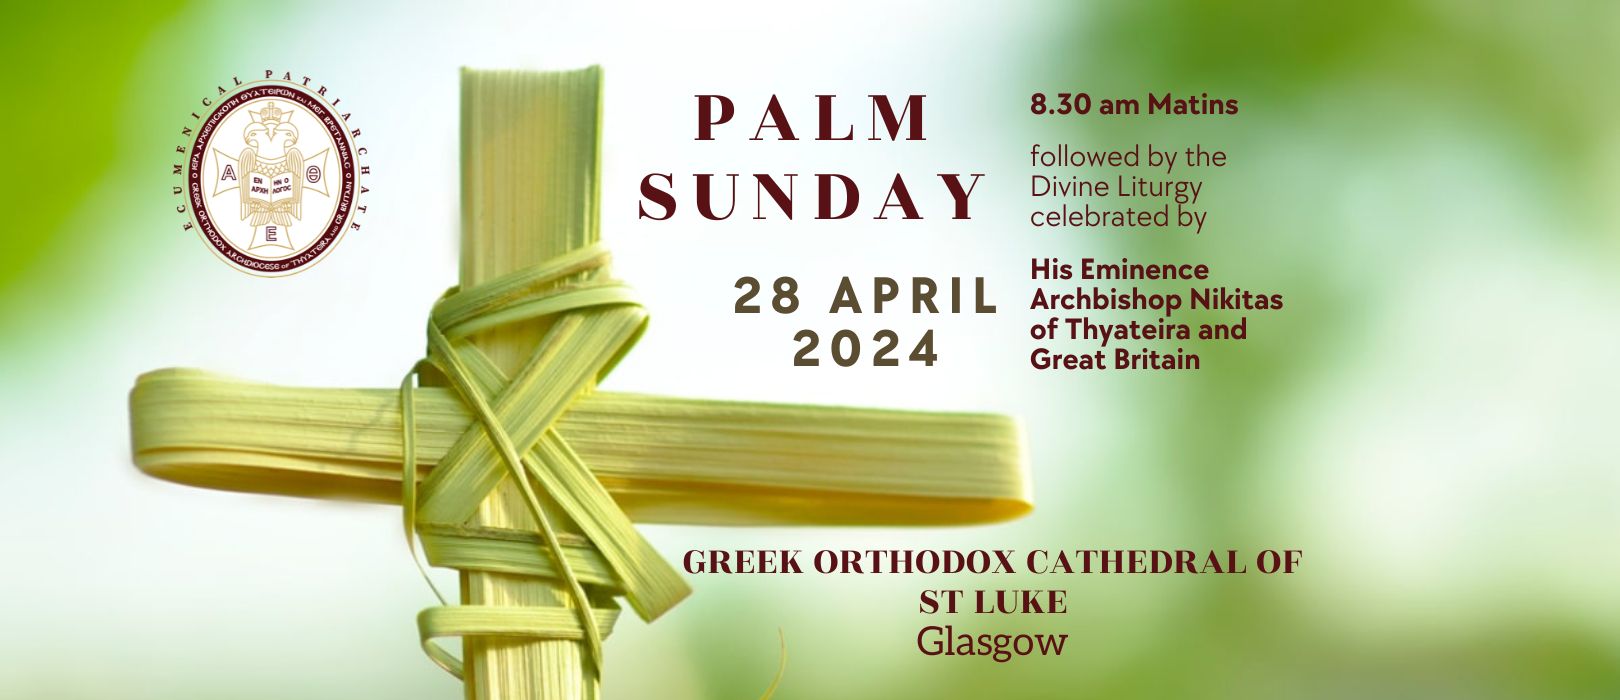 Palm Sunday In Glasgow Archdiocese Of Thyateira And Great Britain